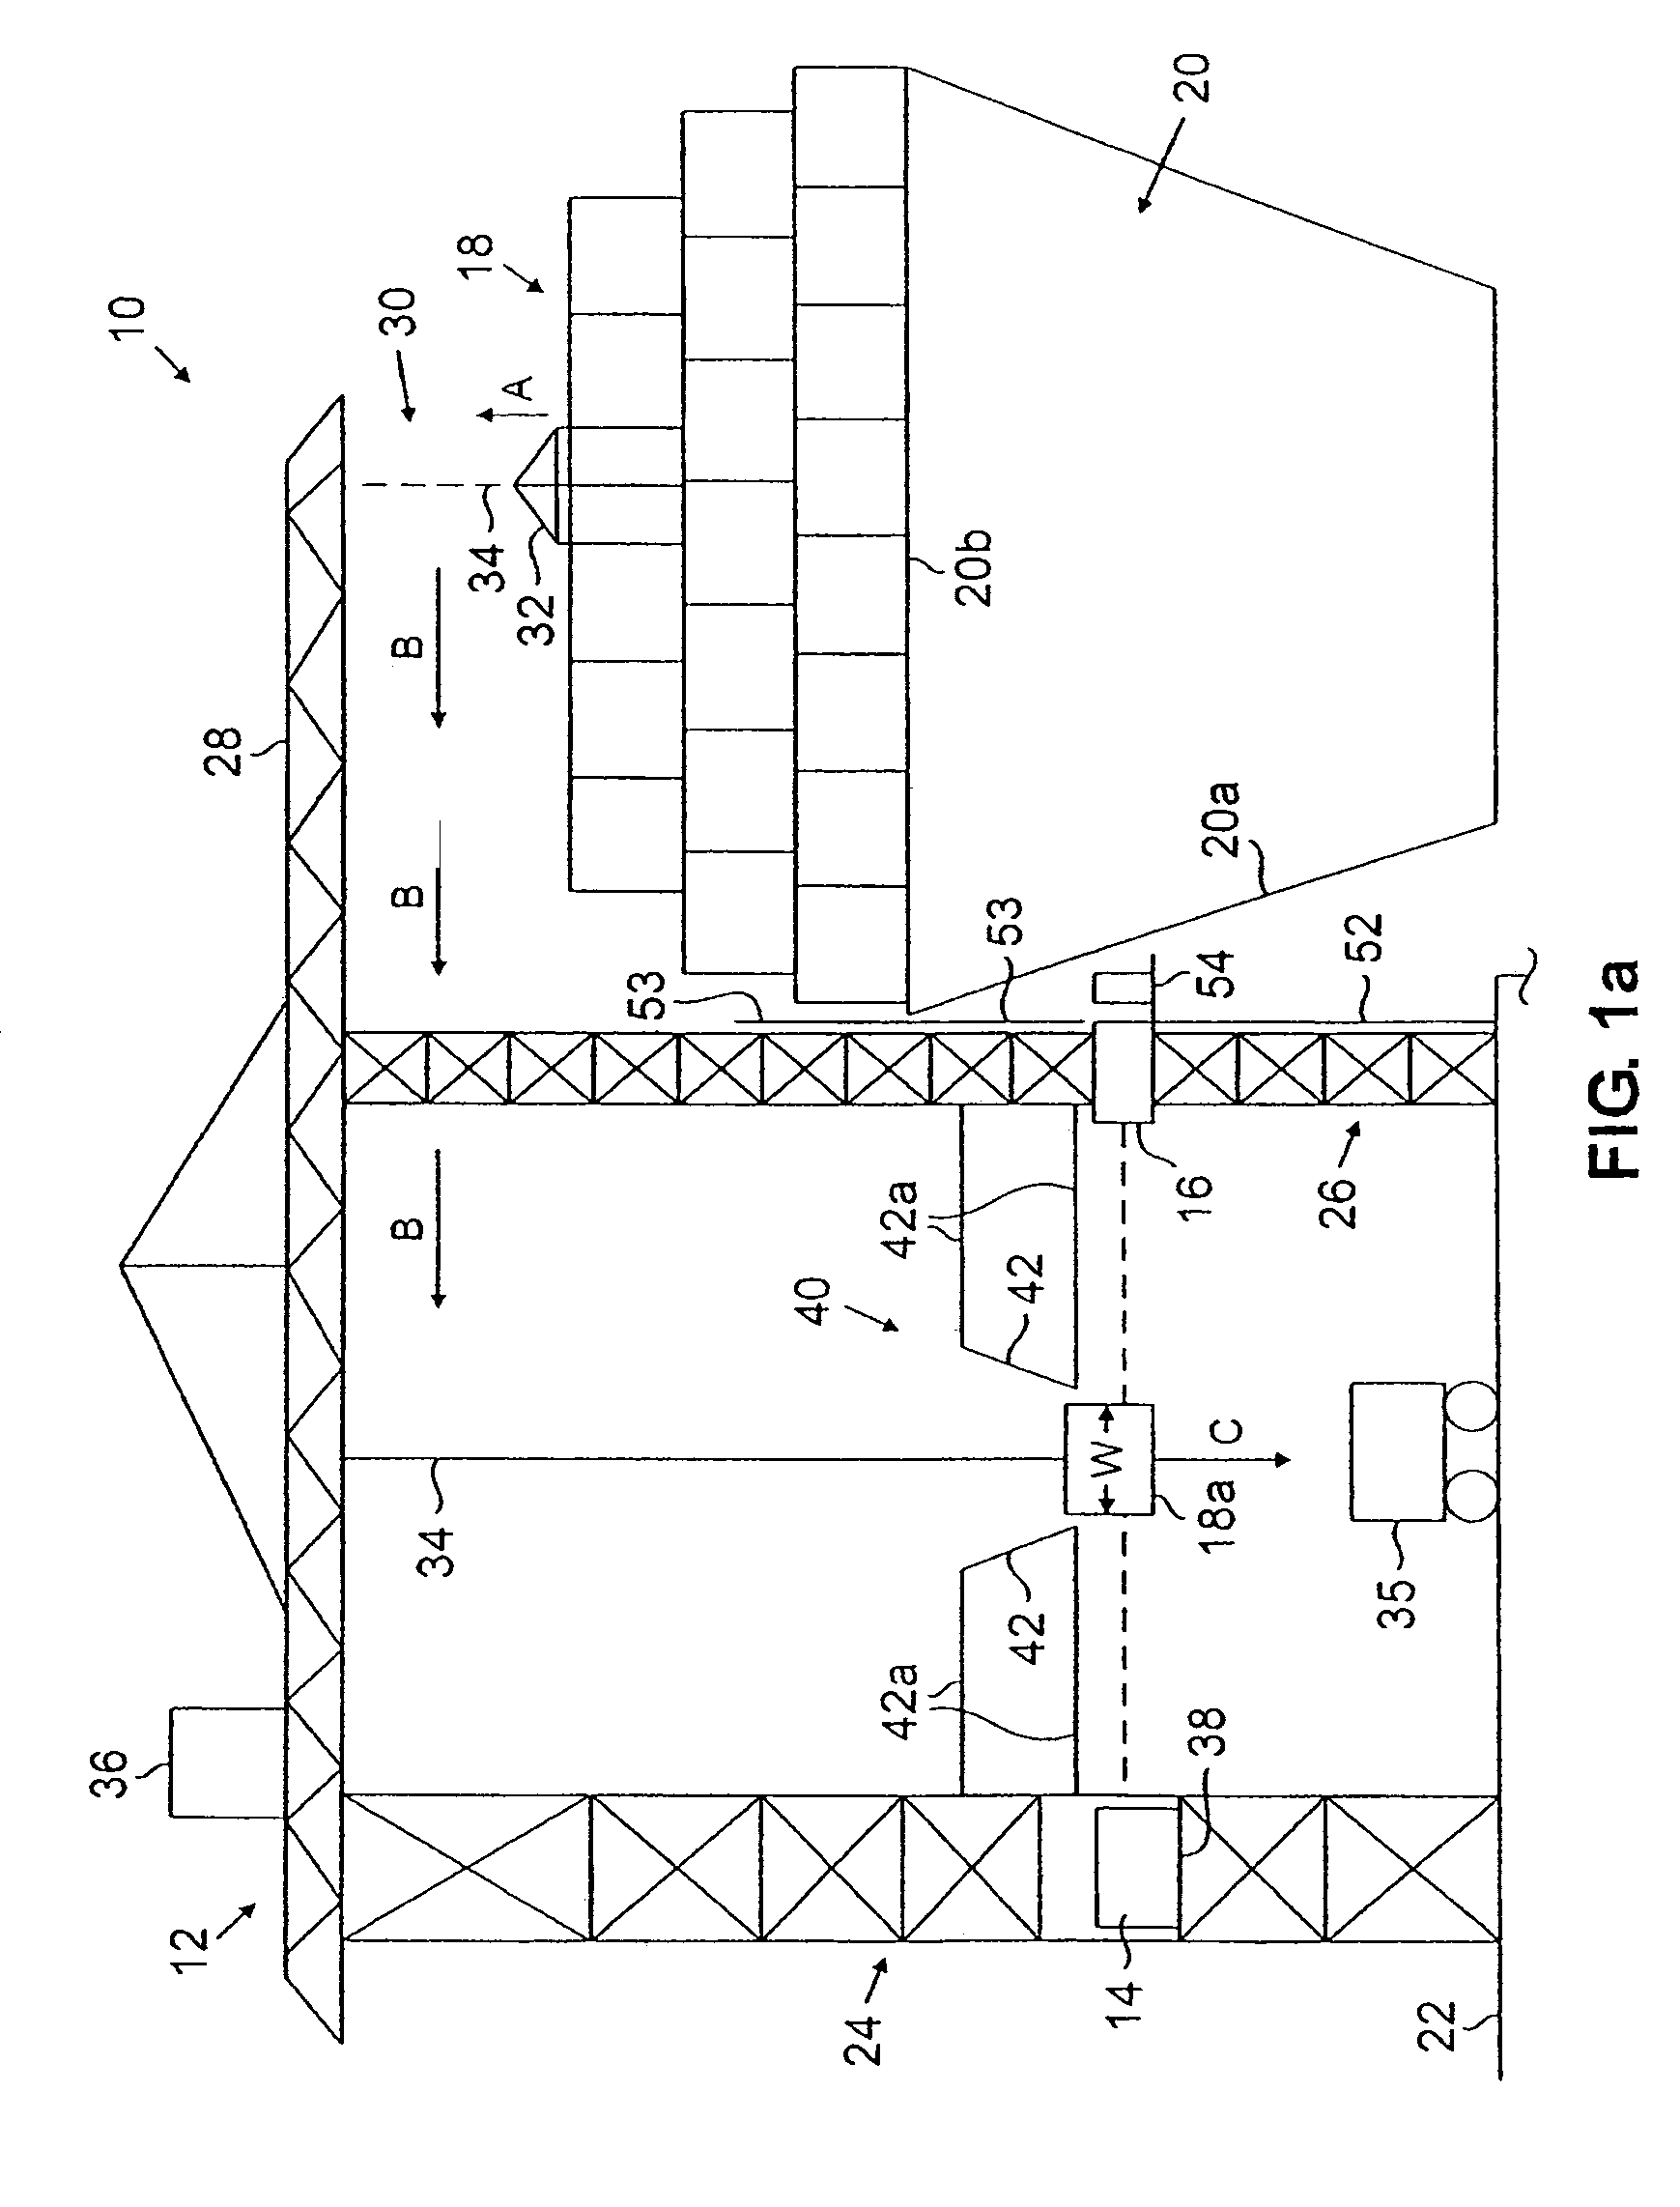 Rotating carriage assembly for use in scanning cargo conveyances transported by a crane